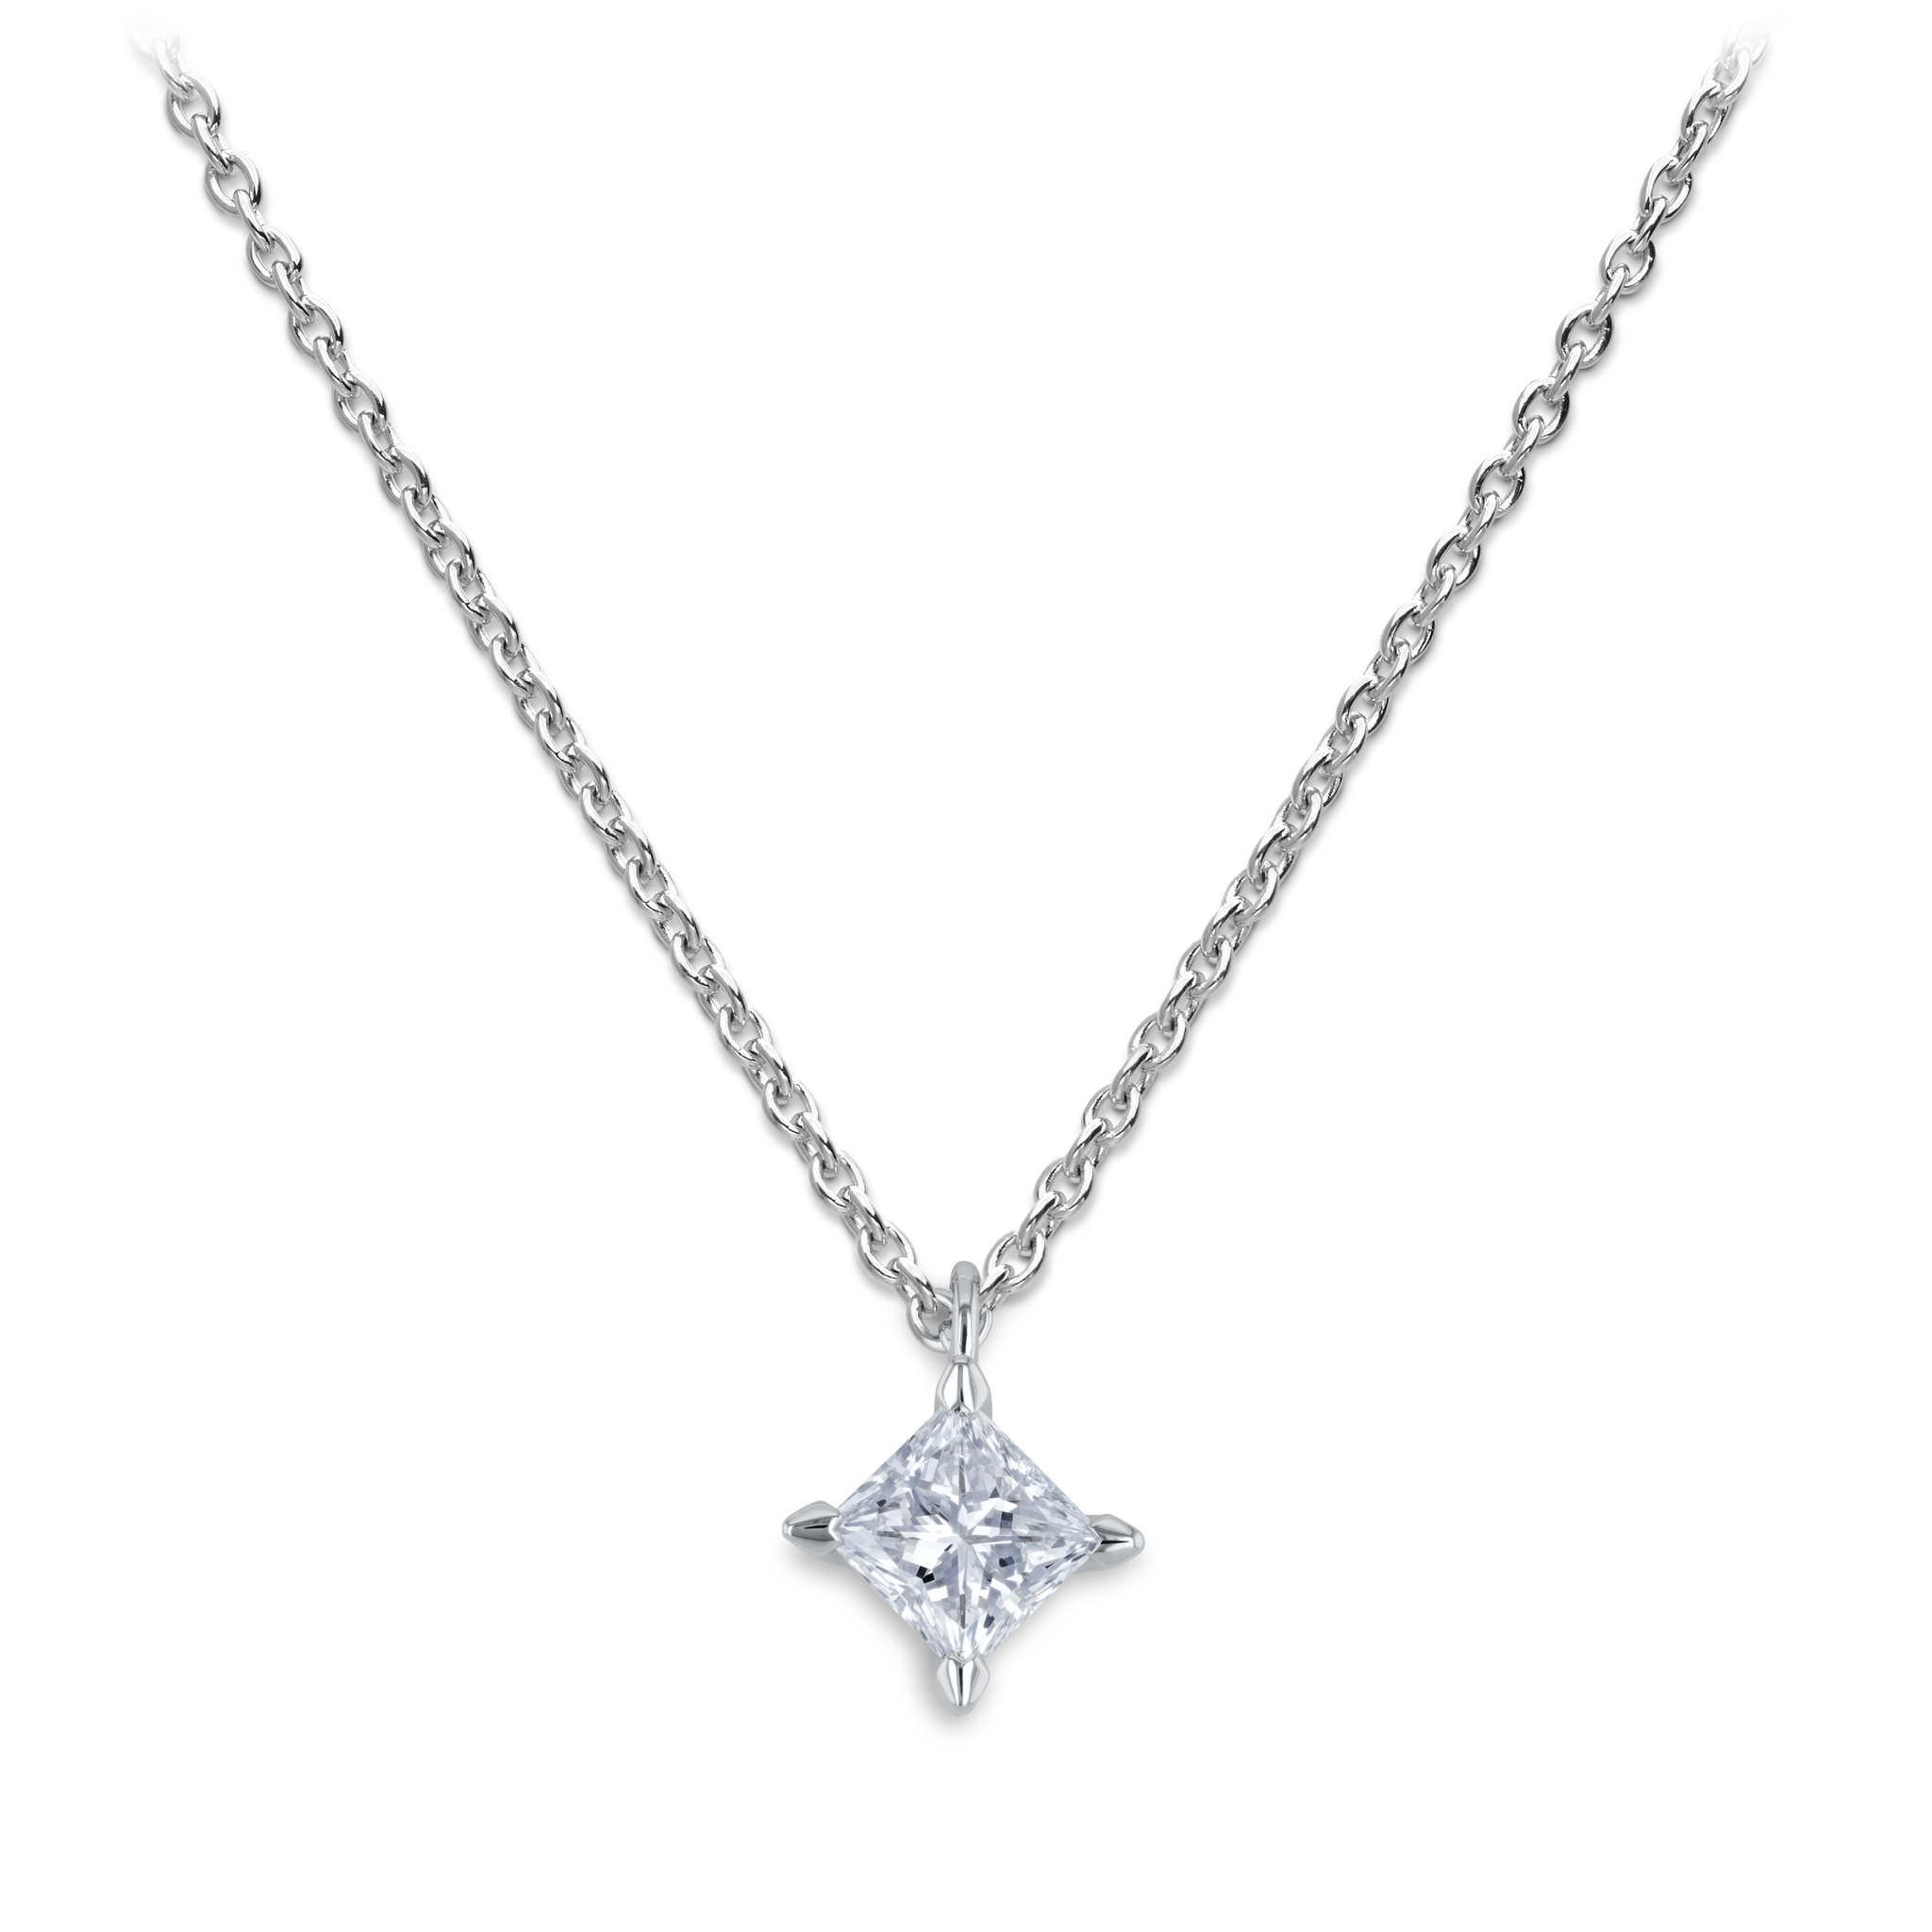 Solitaire necklace with diamond